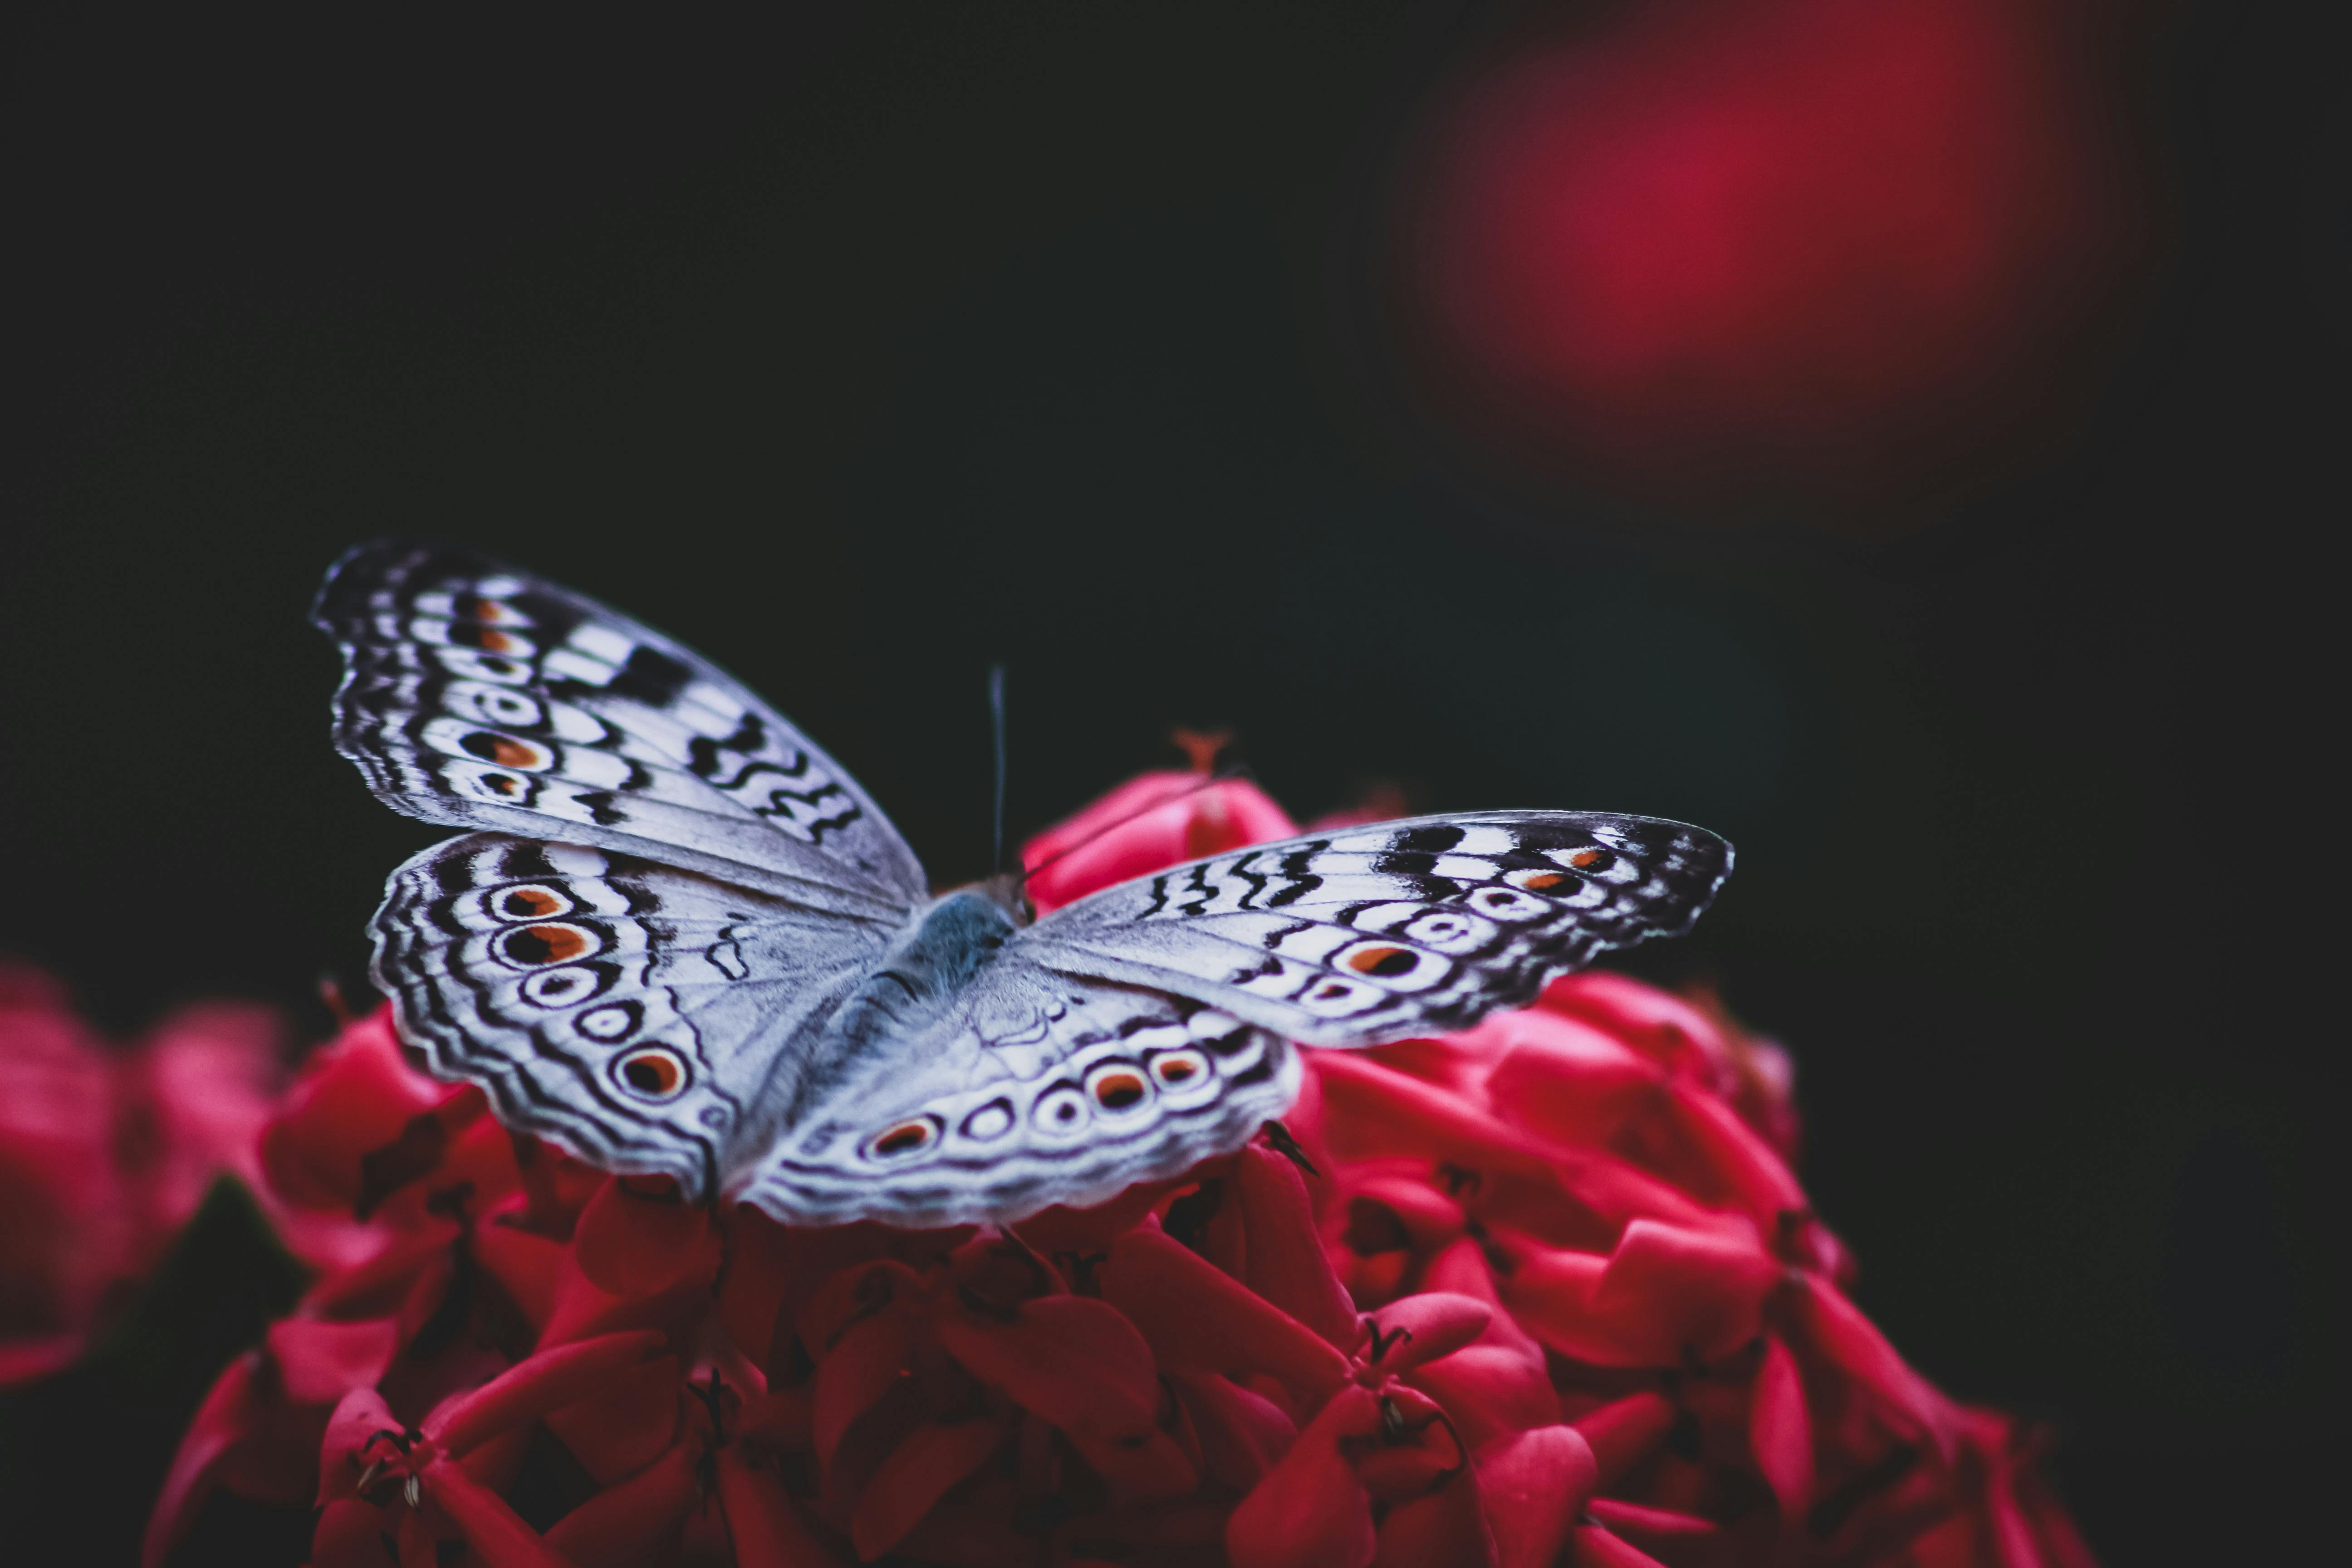 104539 Red Black Butterfly Images Stock Photos  Vectors  Shutterstock